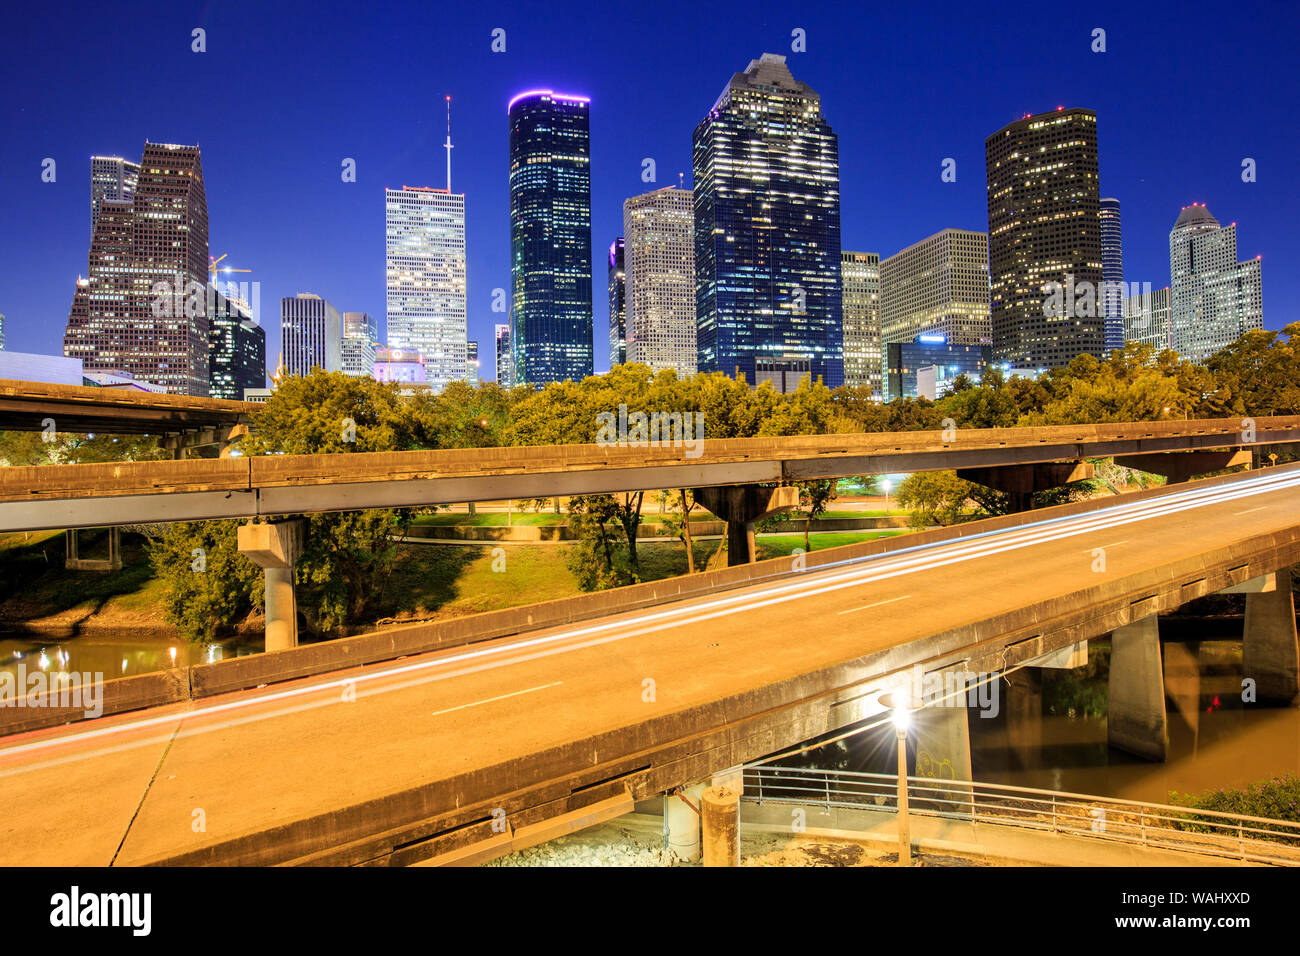 https://c8.alamy.com/comp/WAHXXD/view-of-downtown-houston-city-texas-in-a-beautiful-day-at-night-WAHXXD.jpg